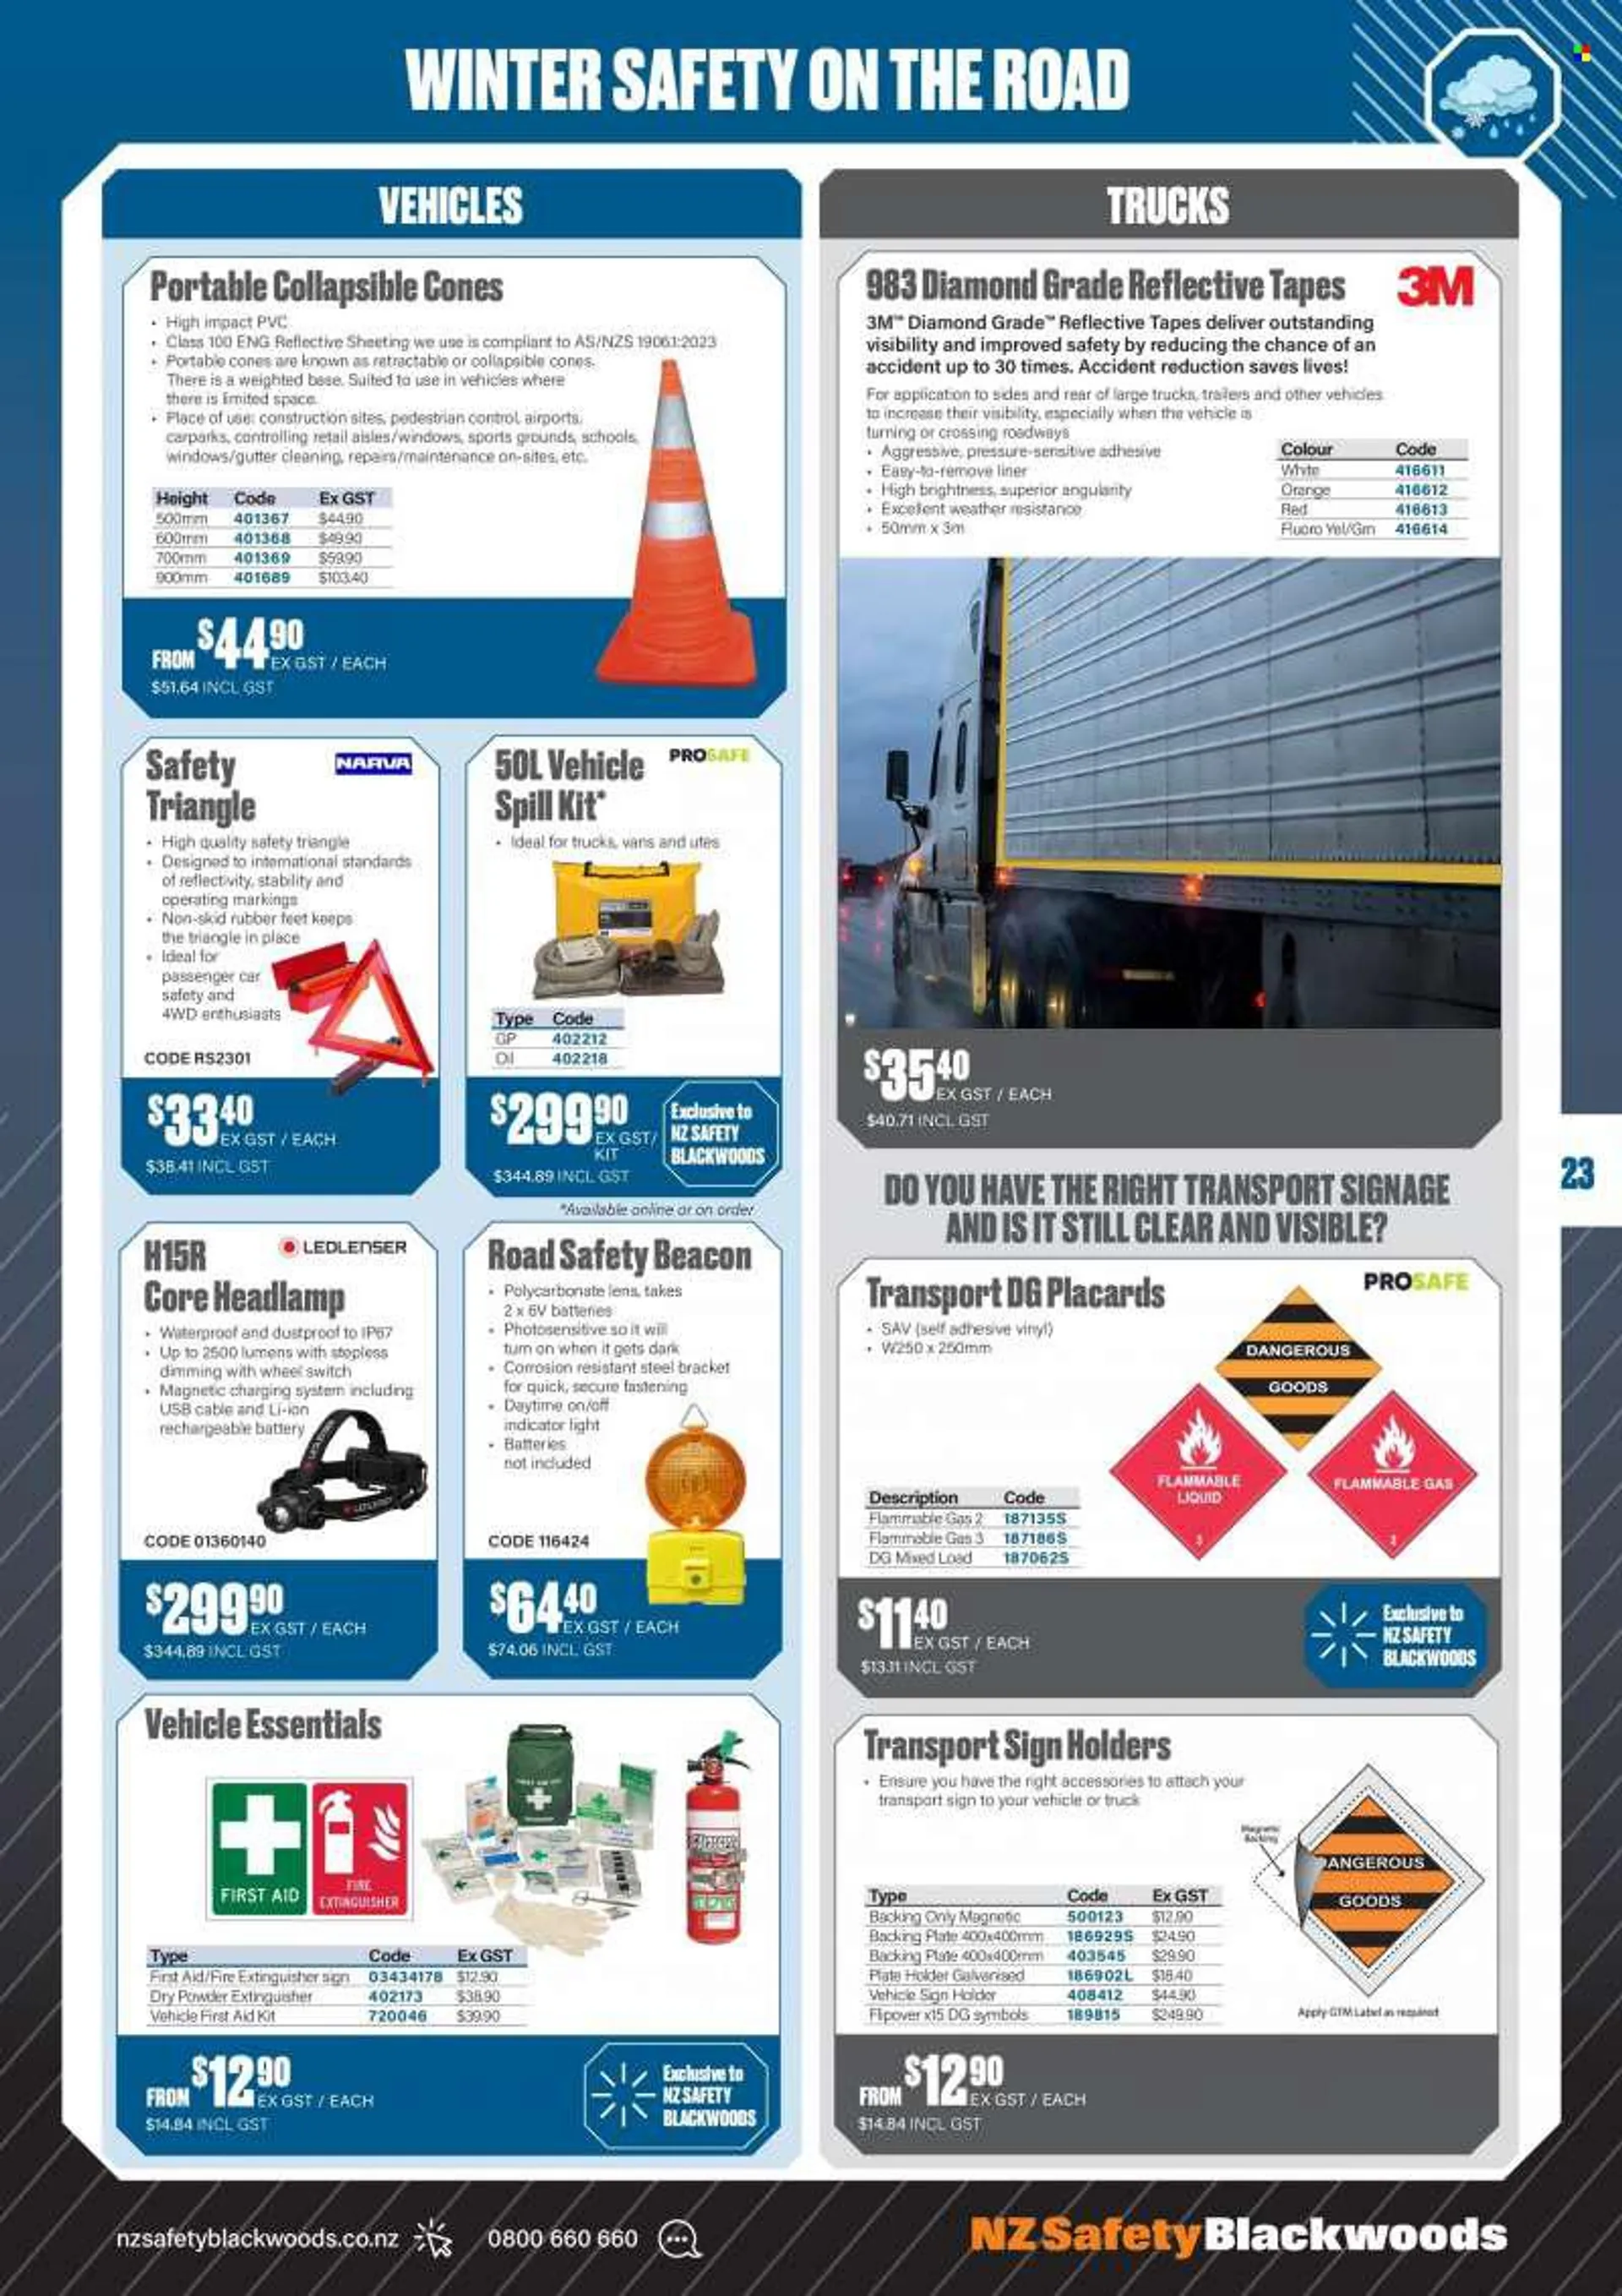 NZ Safety Blackwoods mailer - 01.05.2022 - 31.05.2022. - 1 May 31 May 2022 - Page 23